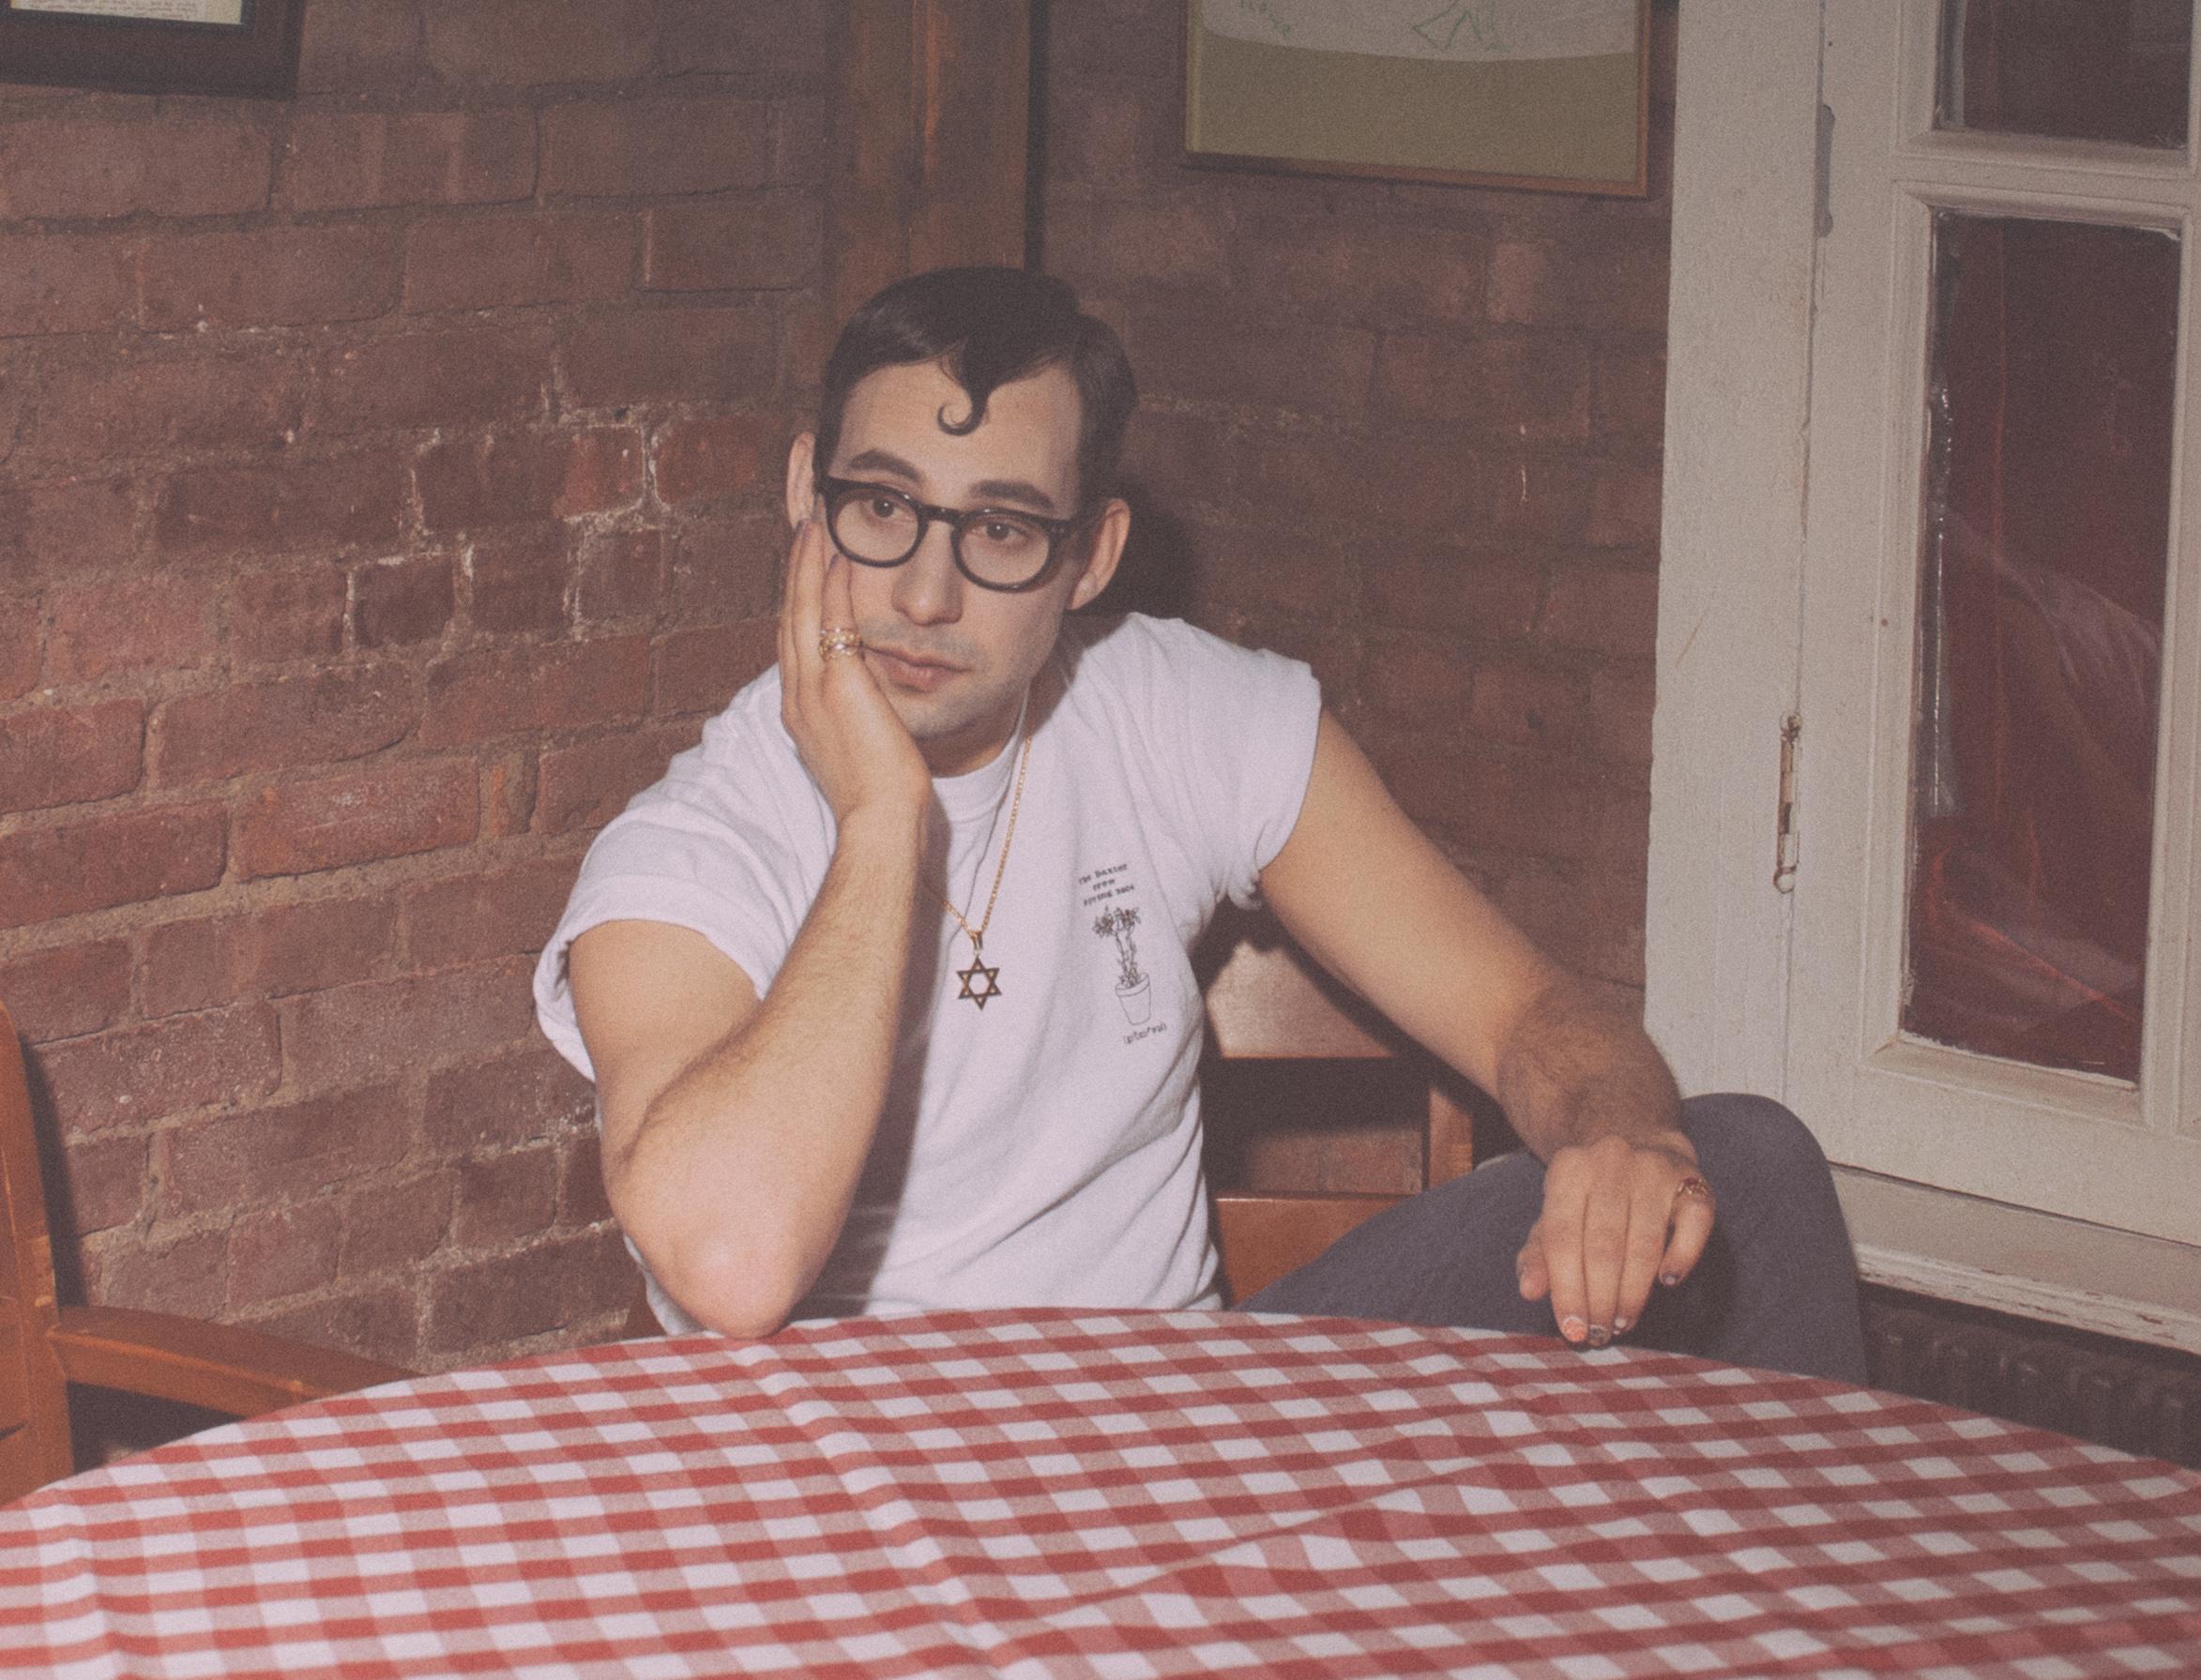 Jack Antonoff: ‘The best chance you make of connecting with other human beings is being honest. It doesn’t always have to be pretty’